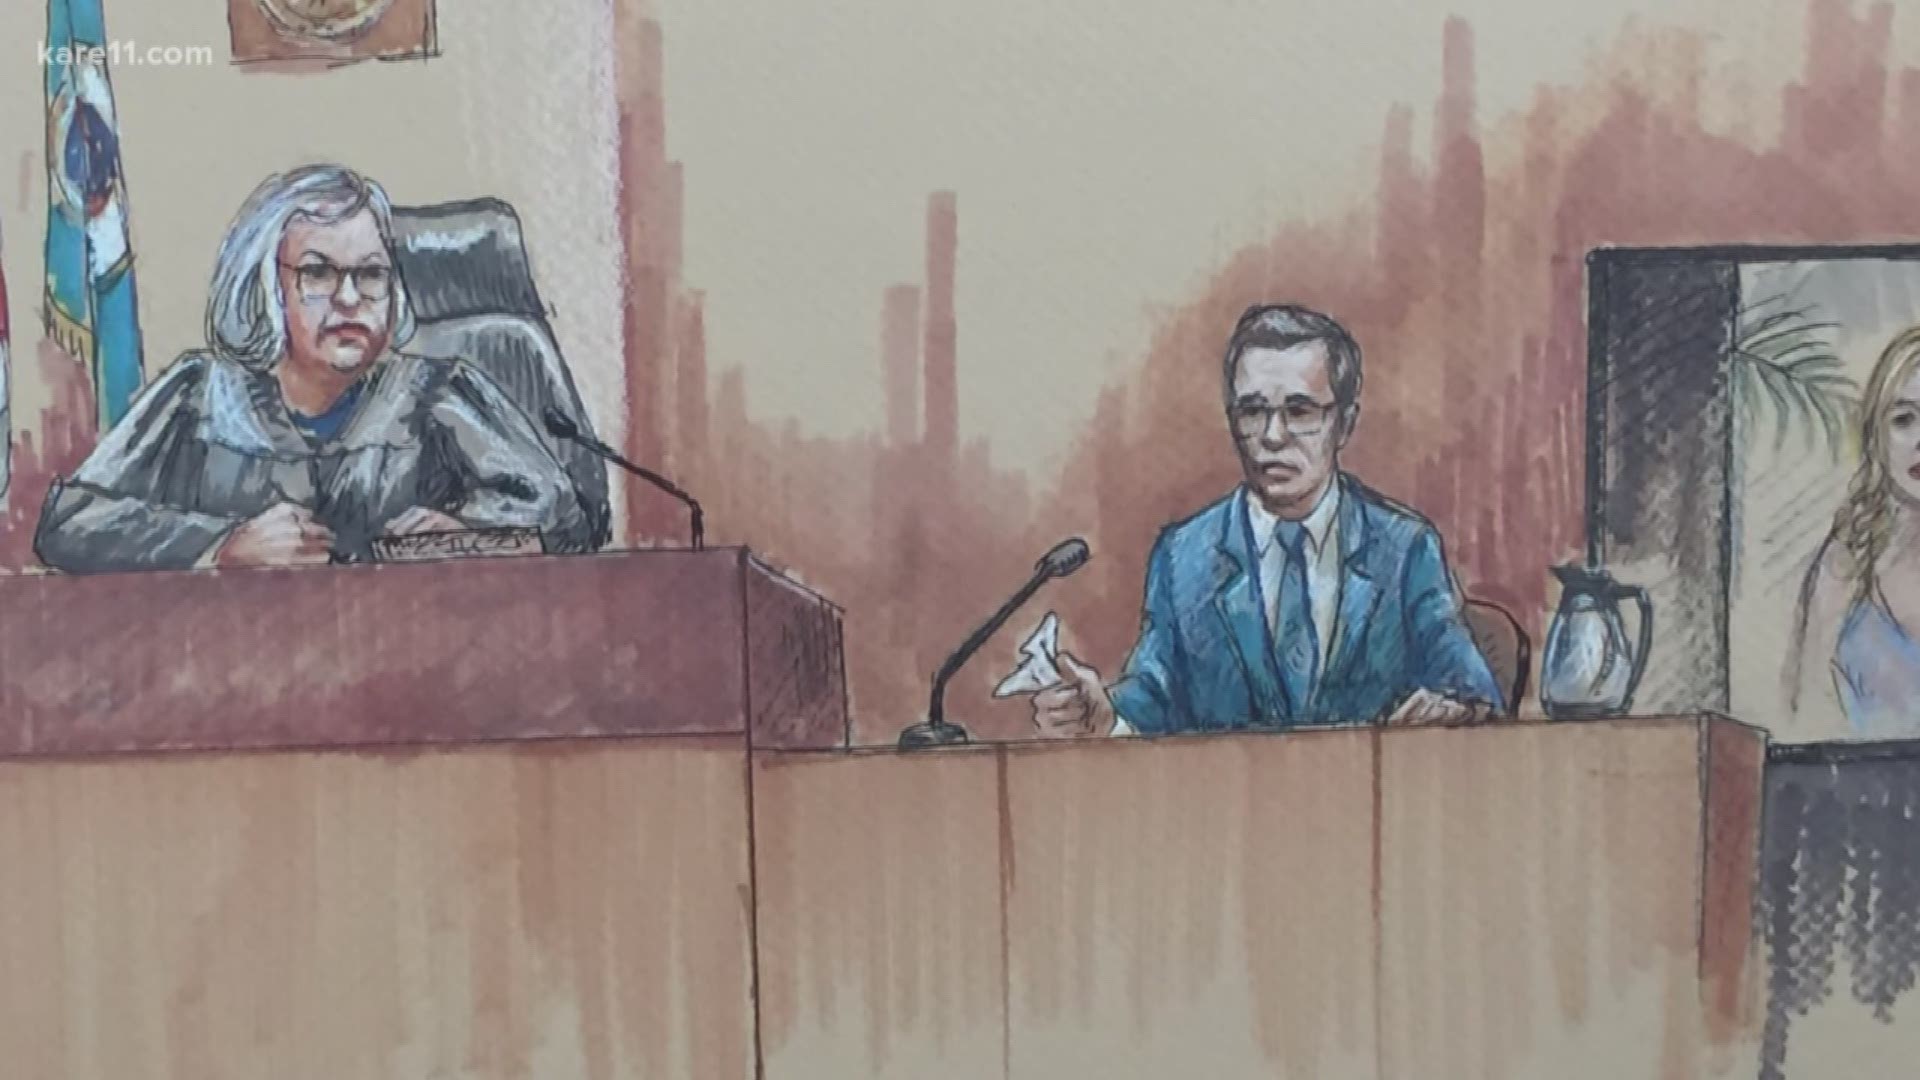 Justine Ruszczyk's fiance Don Damond testified, and the prosecution and defense gave their opening statements in court Tuesday in the Mohamed Noor trial. https://kare11.tv/2uX2wwM